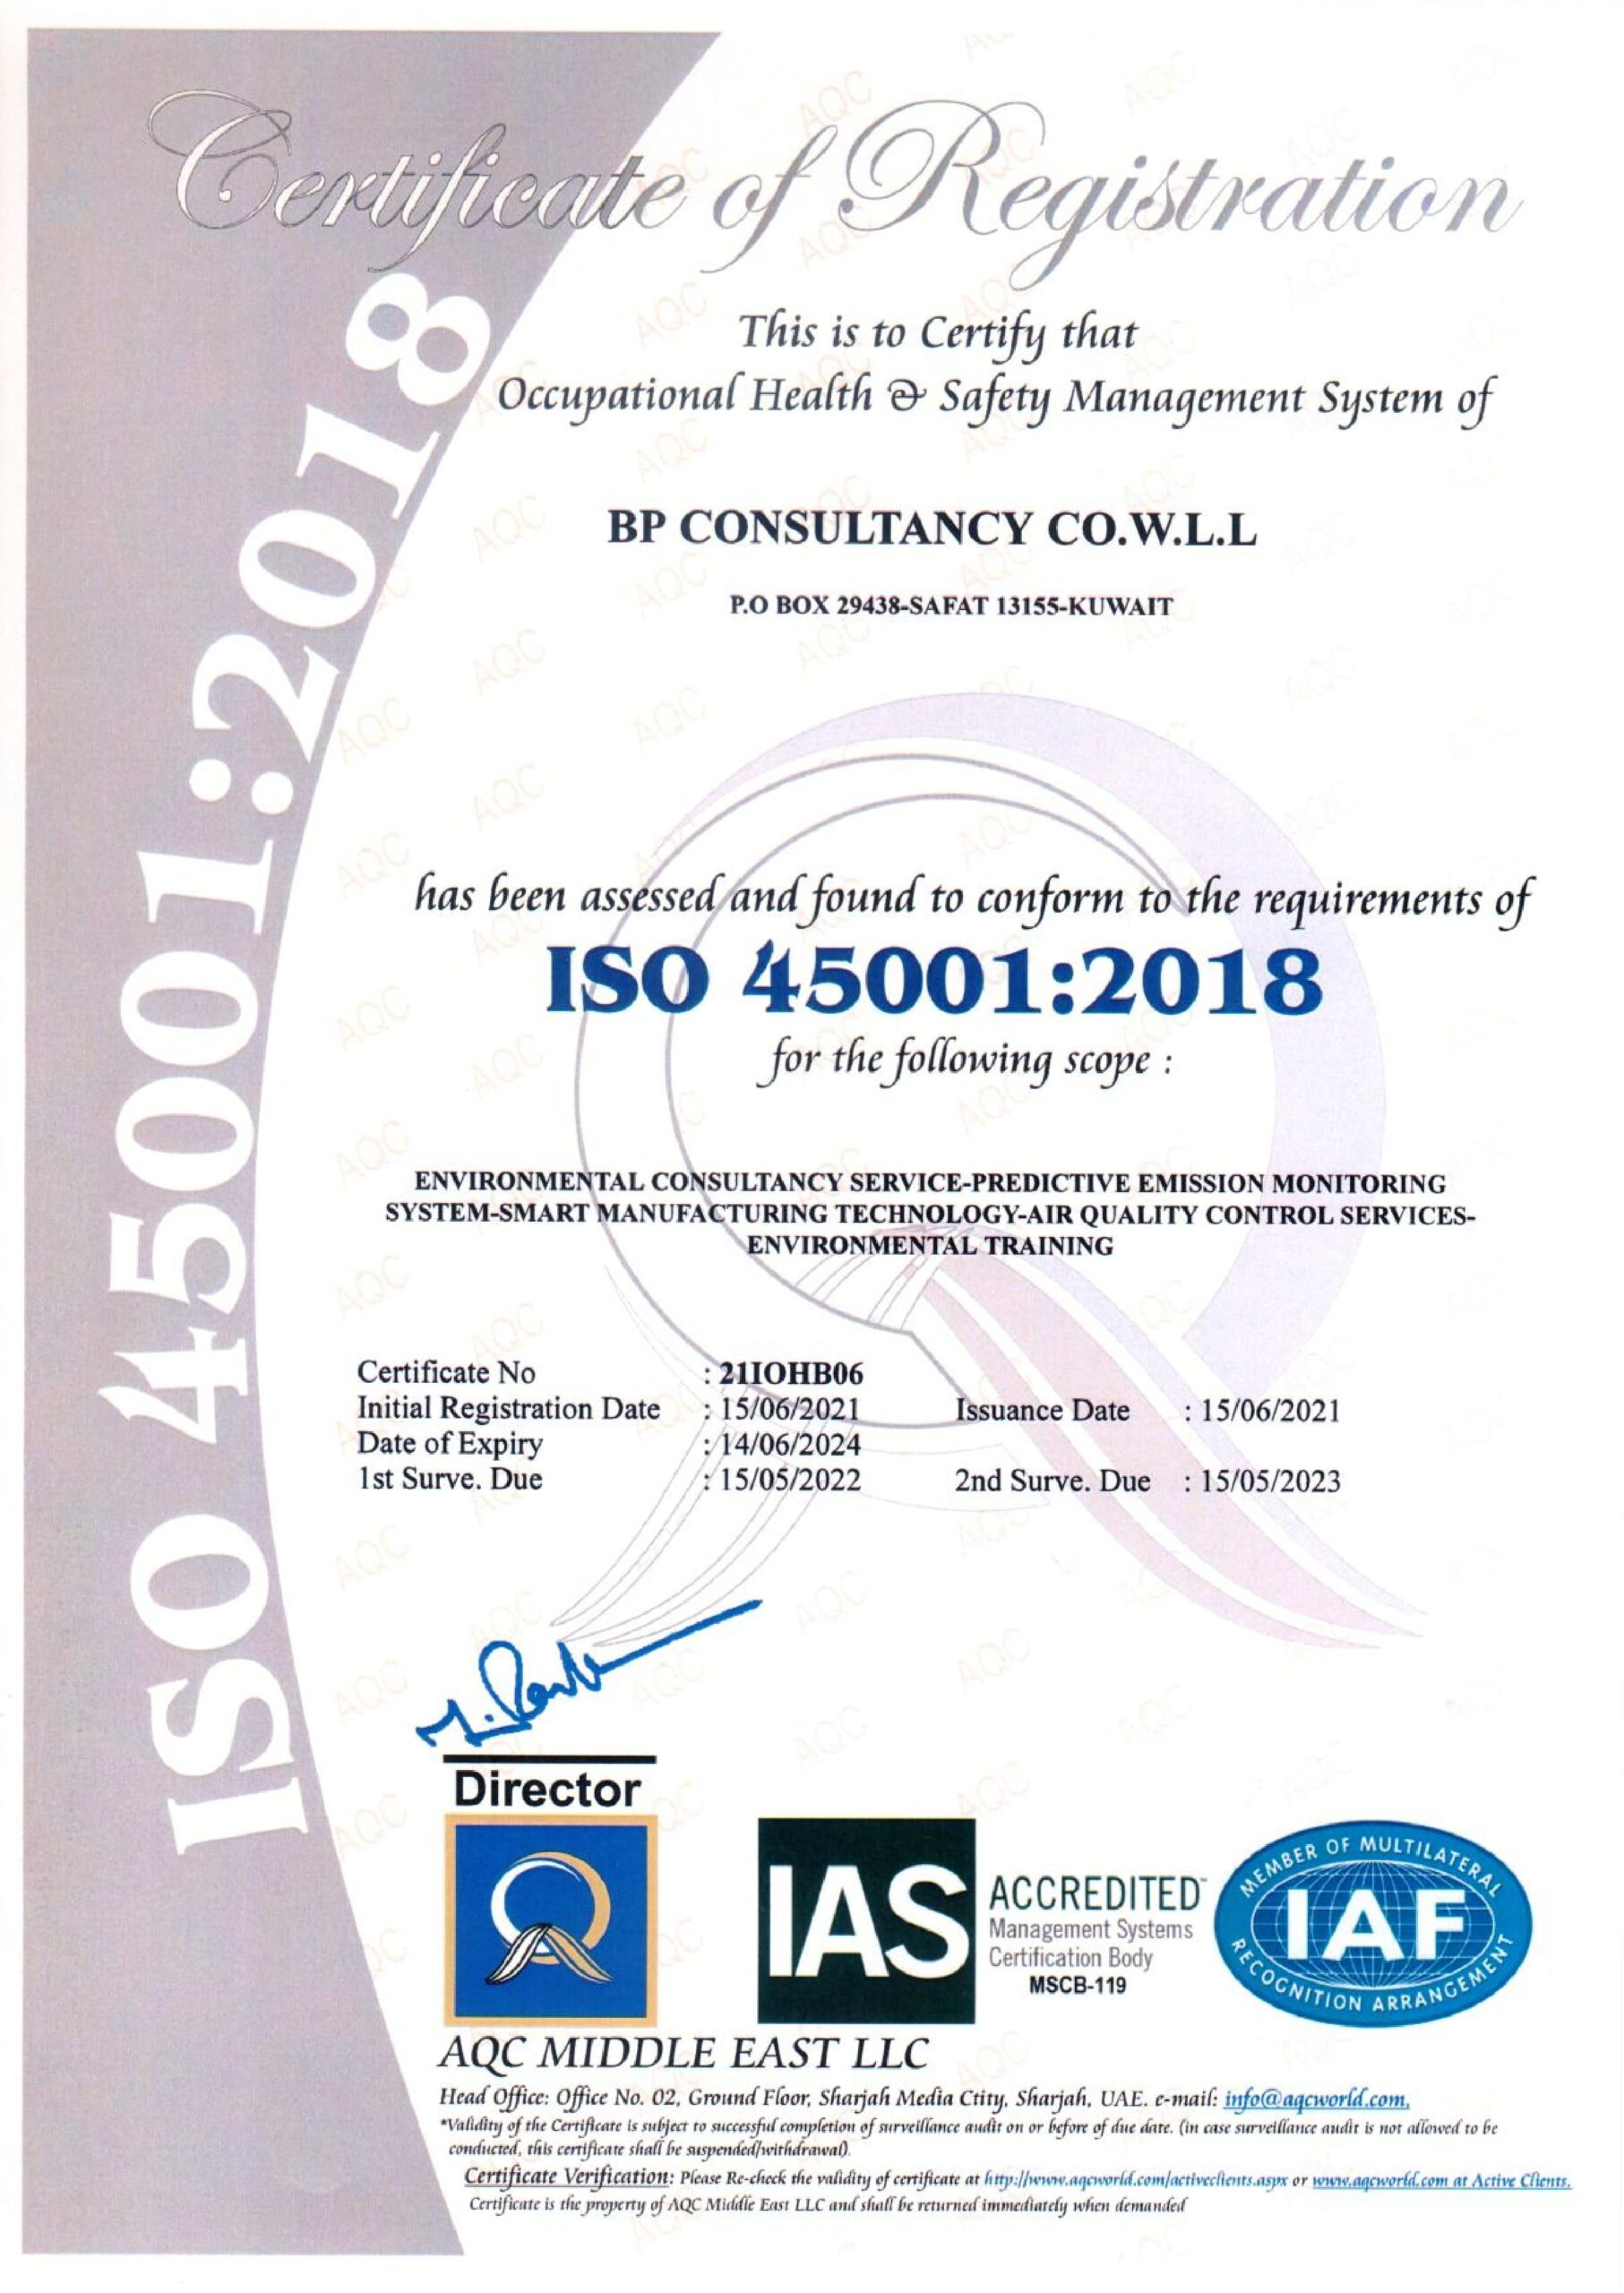 Certification to ISO 45001:2018